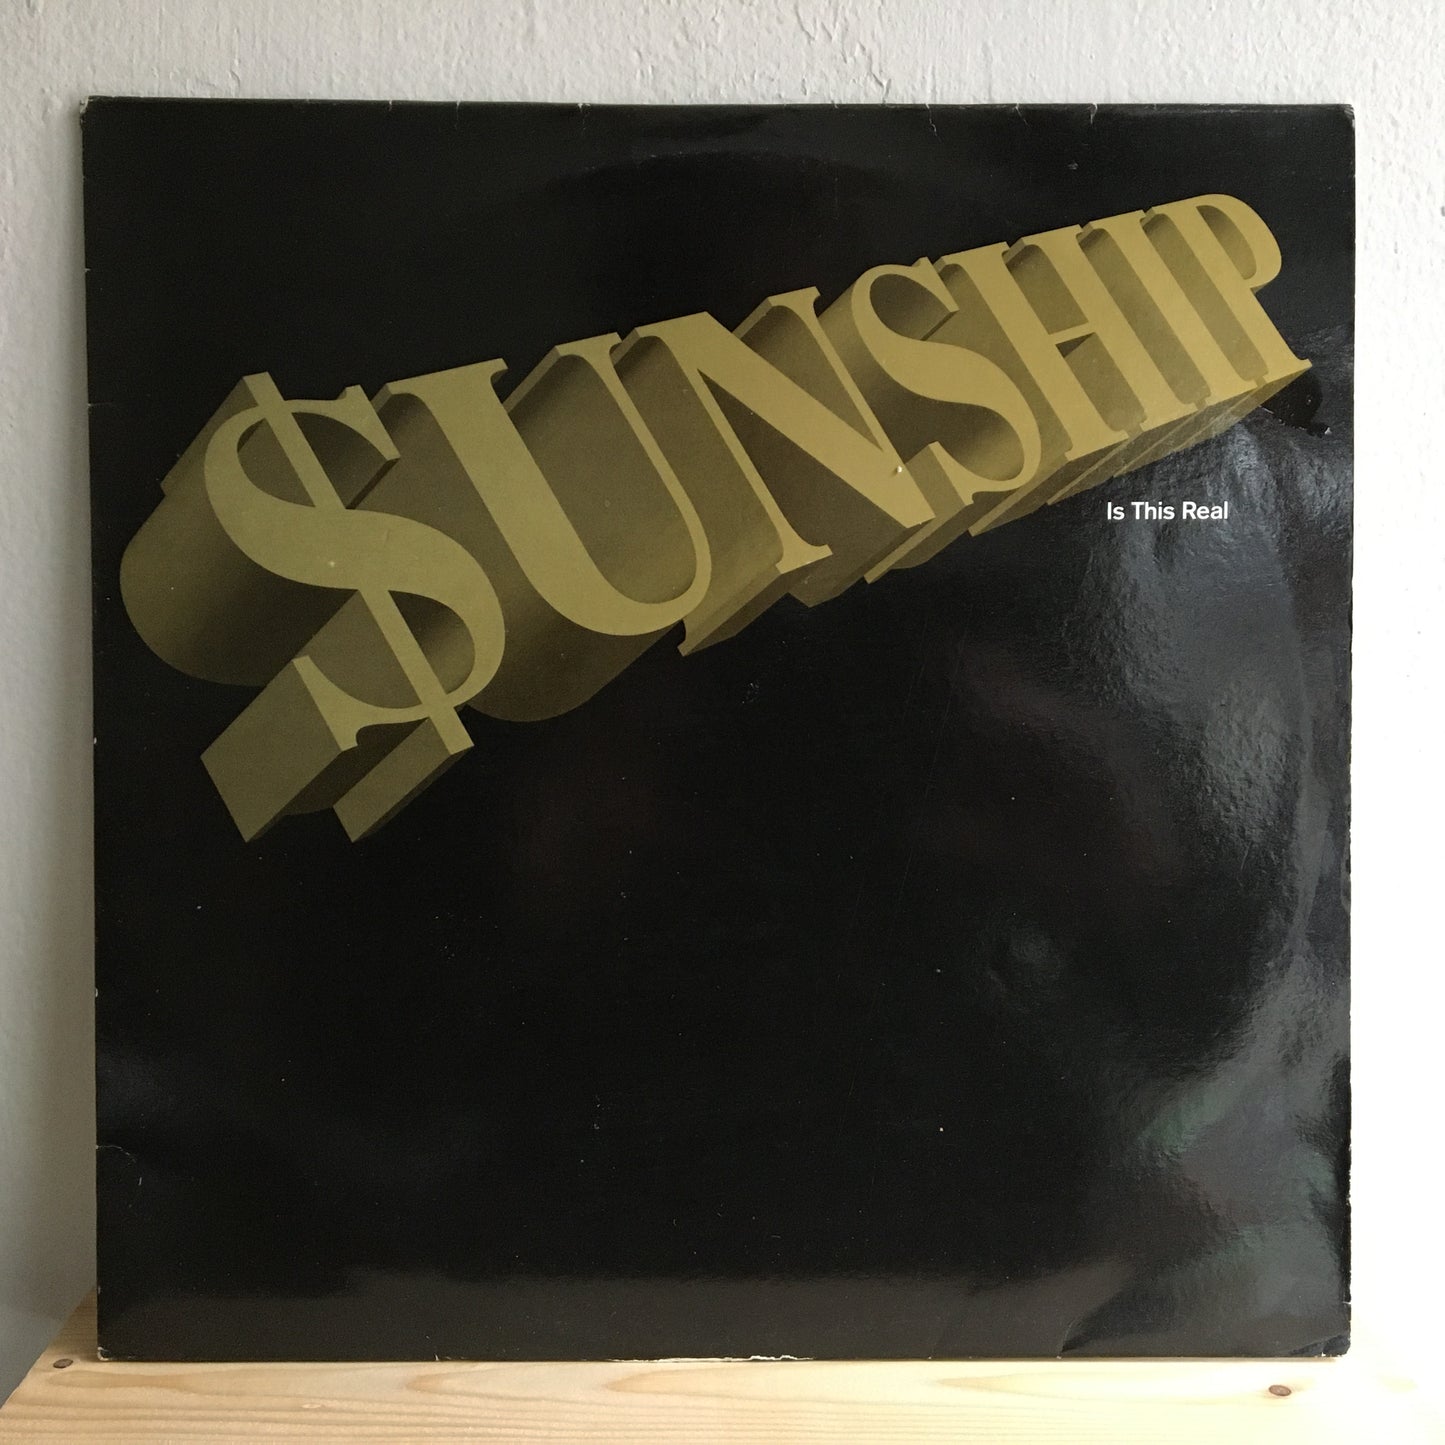 $unship (Sunship) – Is This Real